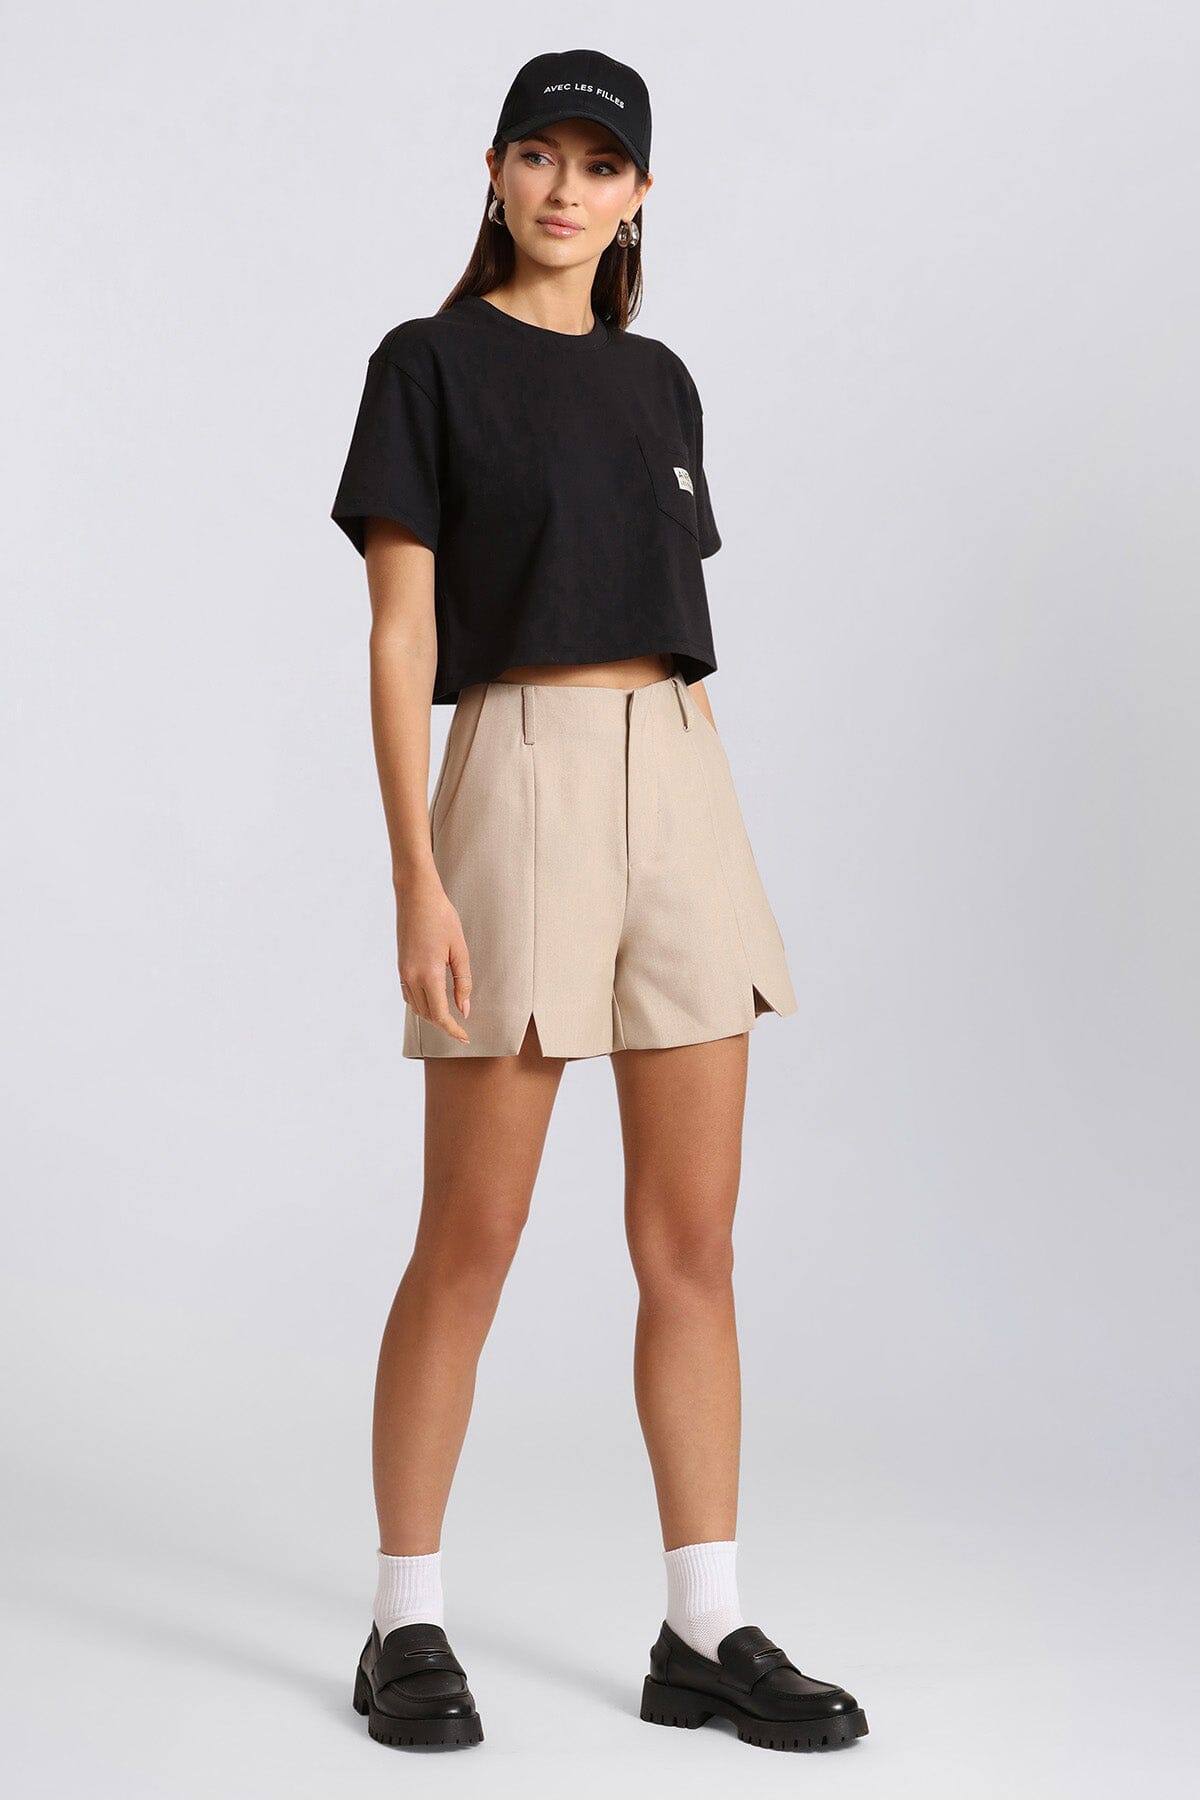 Rebellious Fashion tailored high rise shorts in sage